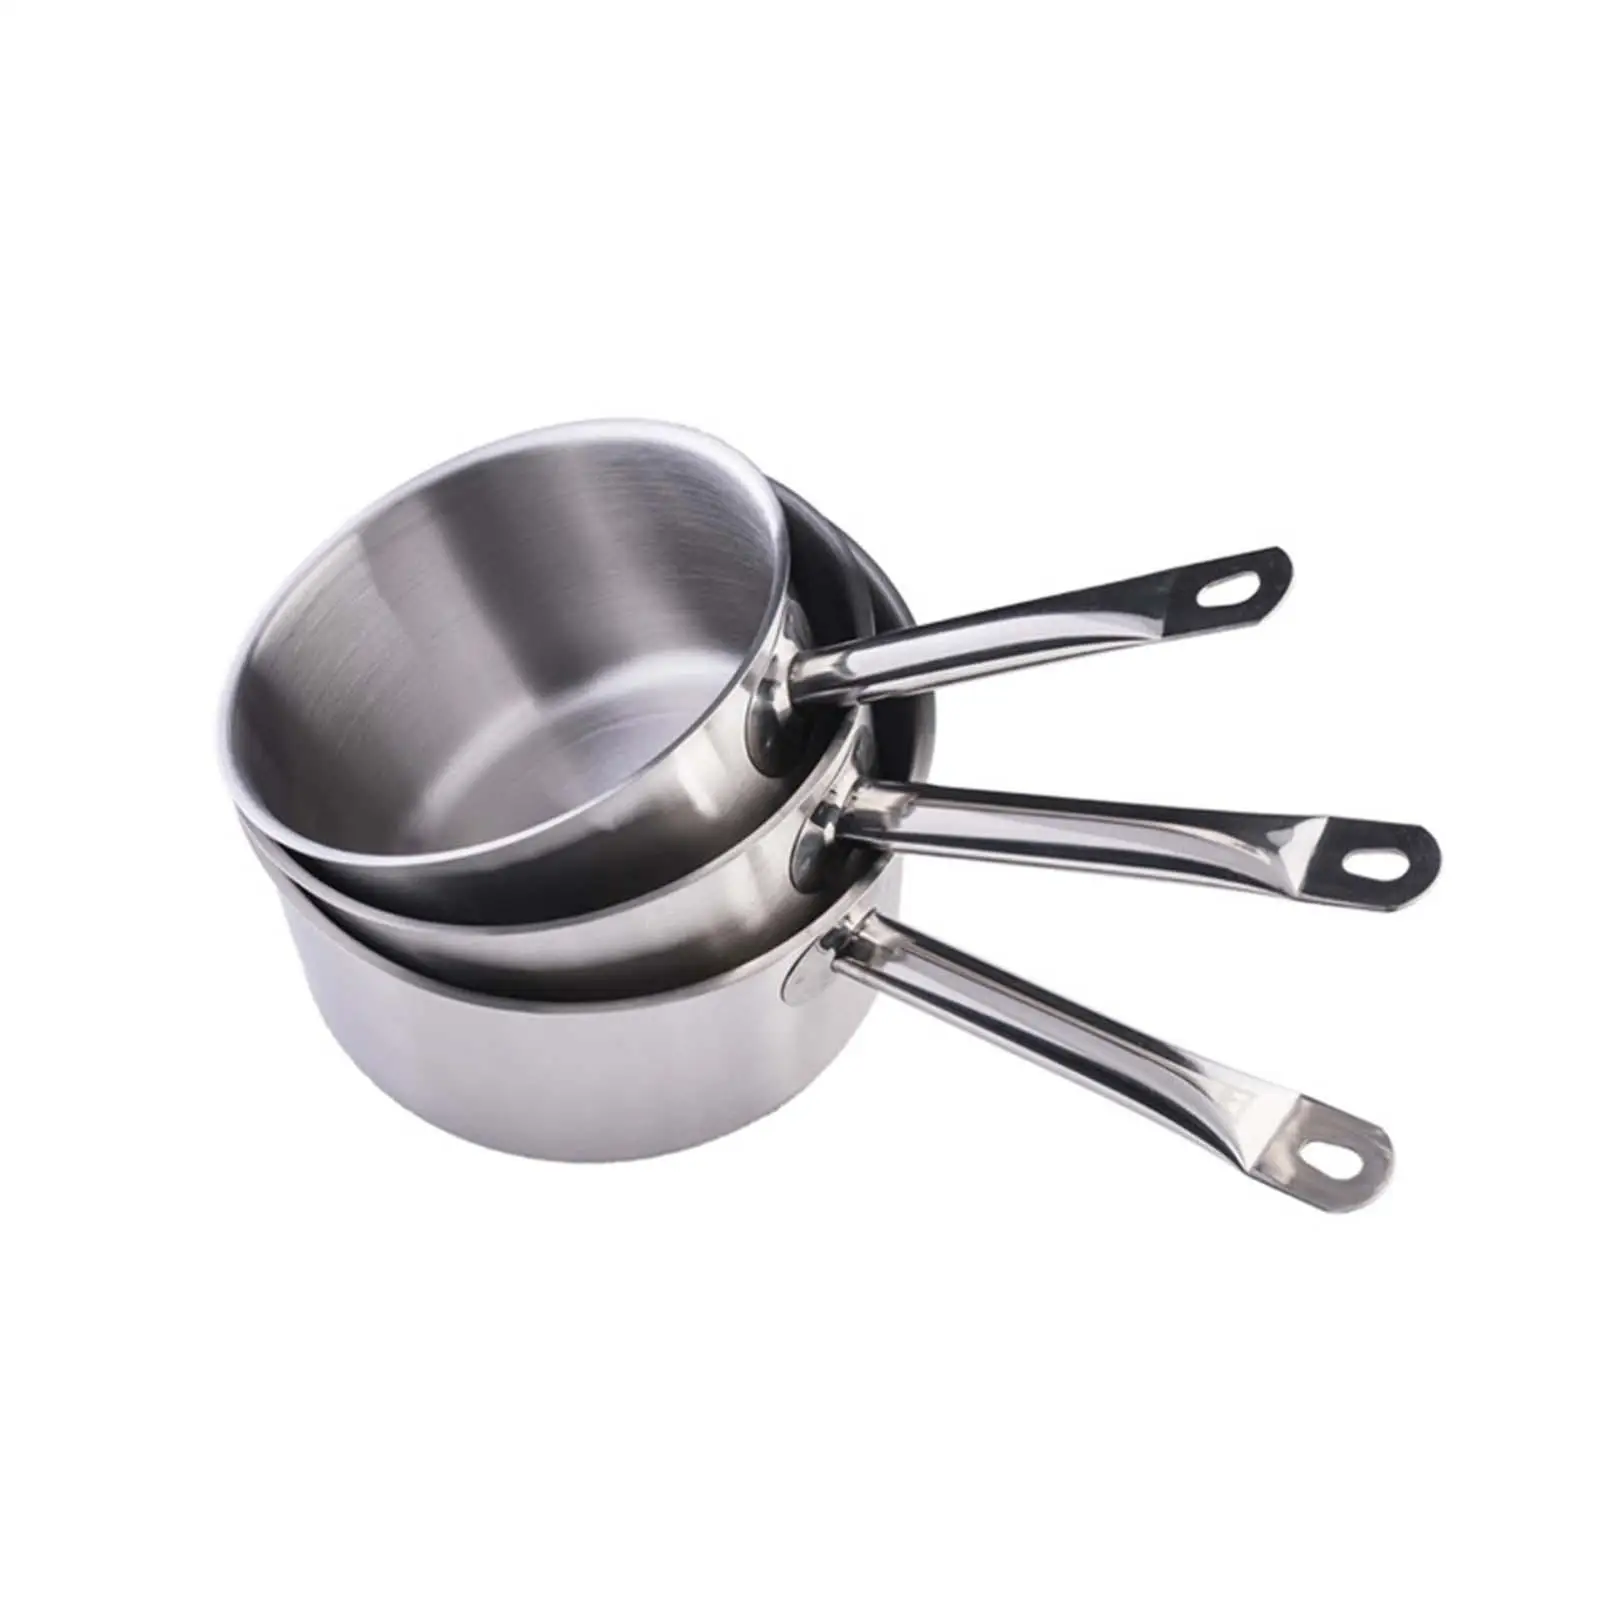 Stainless Steel Sauce Pan with Lid Cookware 2.6L Induction Milk Pots Pasta for Sauce Gravies Restaurant Kitchen